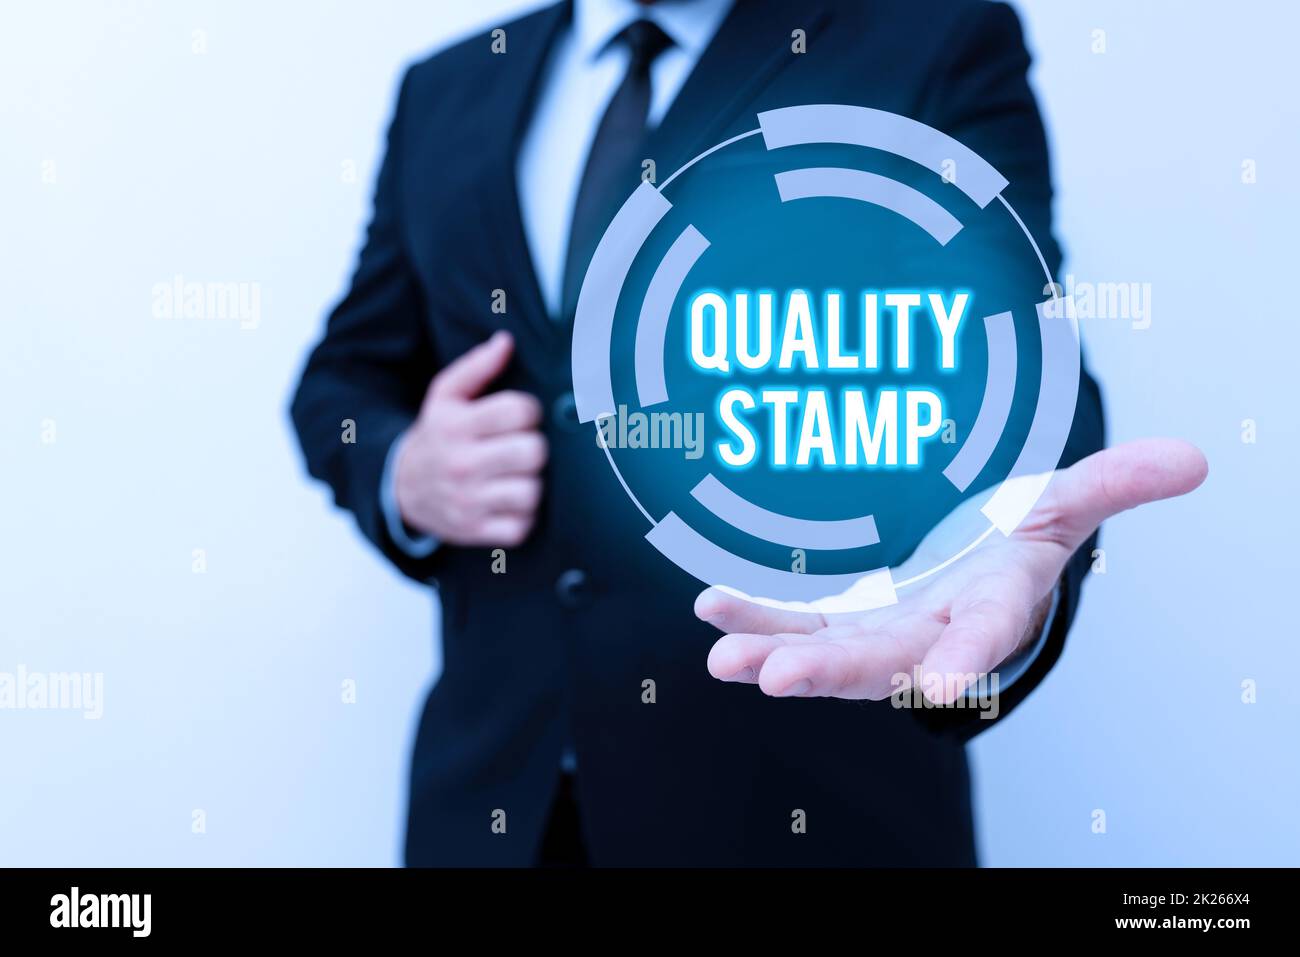 Text caption presenting Quality Stamp. Business idea Seal of Approval Good Impression Qualified Passed Inspection Presenting New Plans And Ideas Demonstrating Planning Process Stock Photo